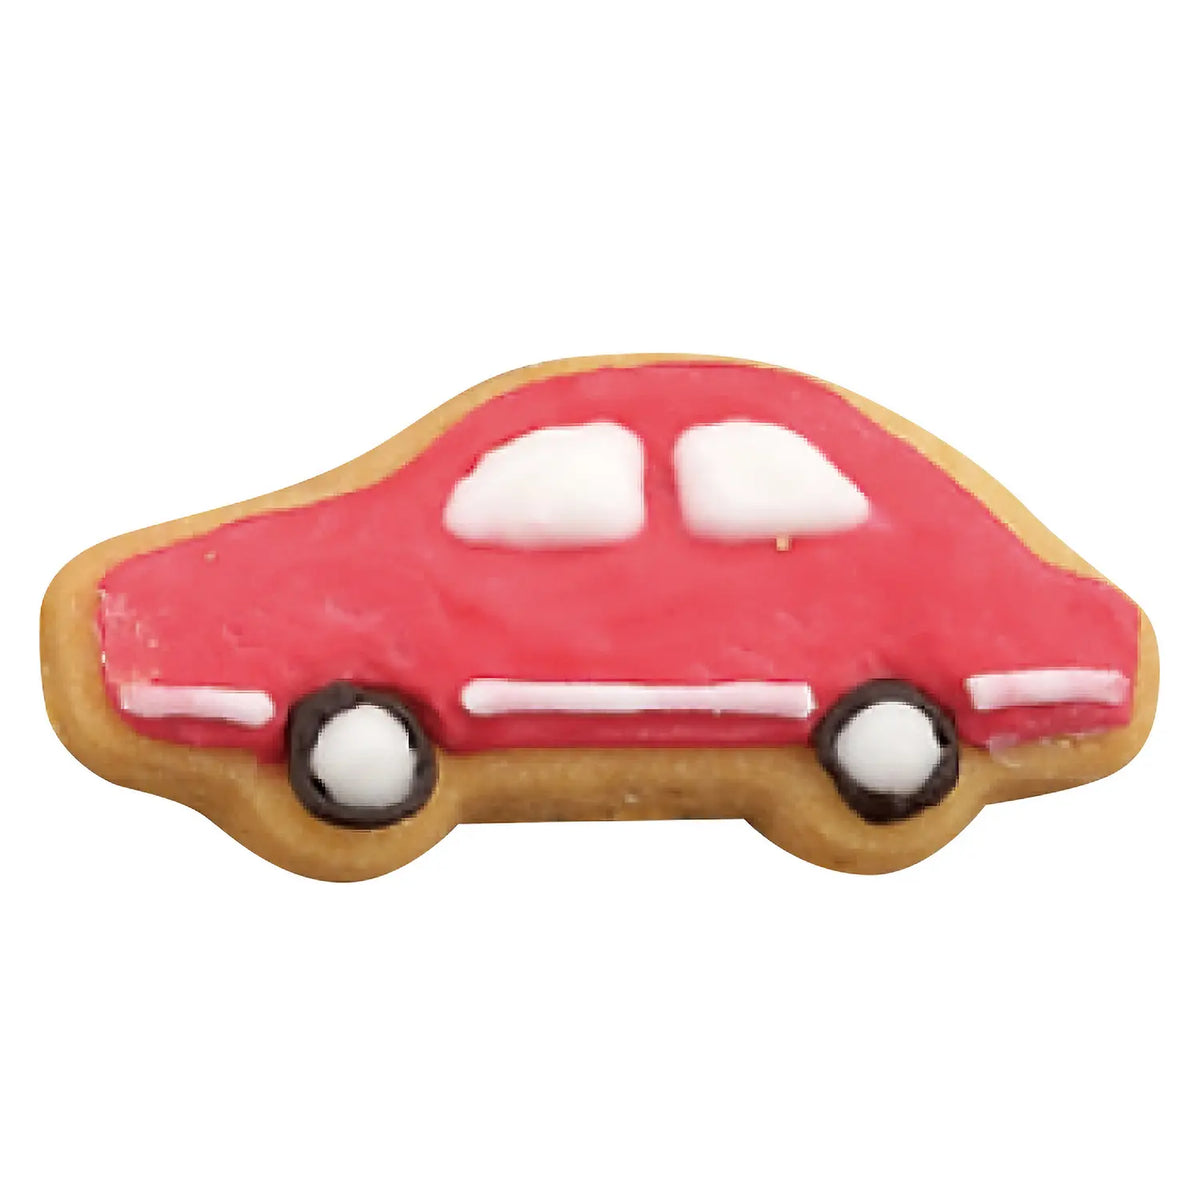 TIGERCROWN Cake Land Stainless Steel Cookie Cutter Car